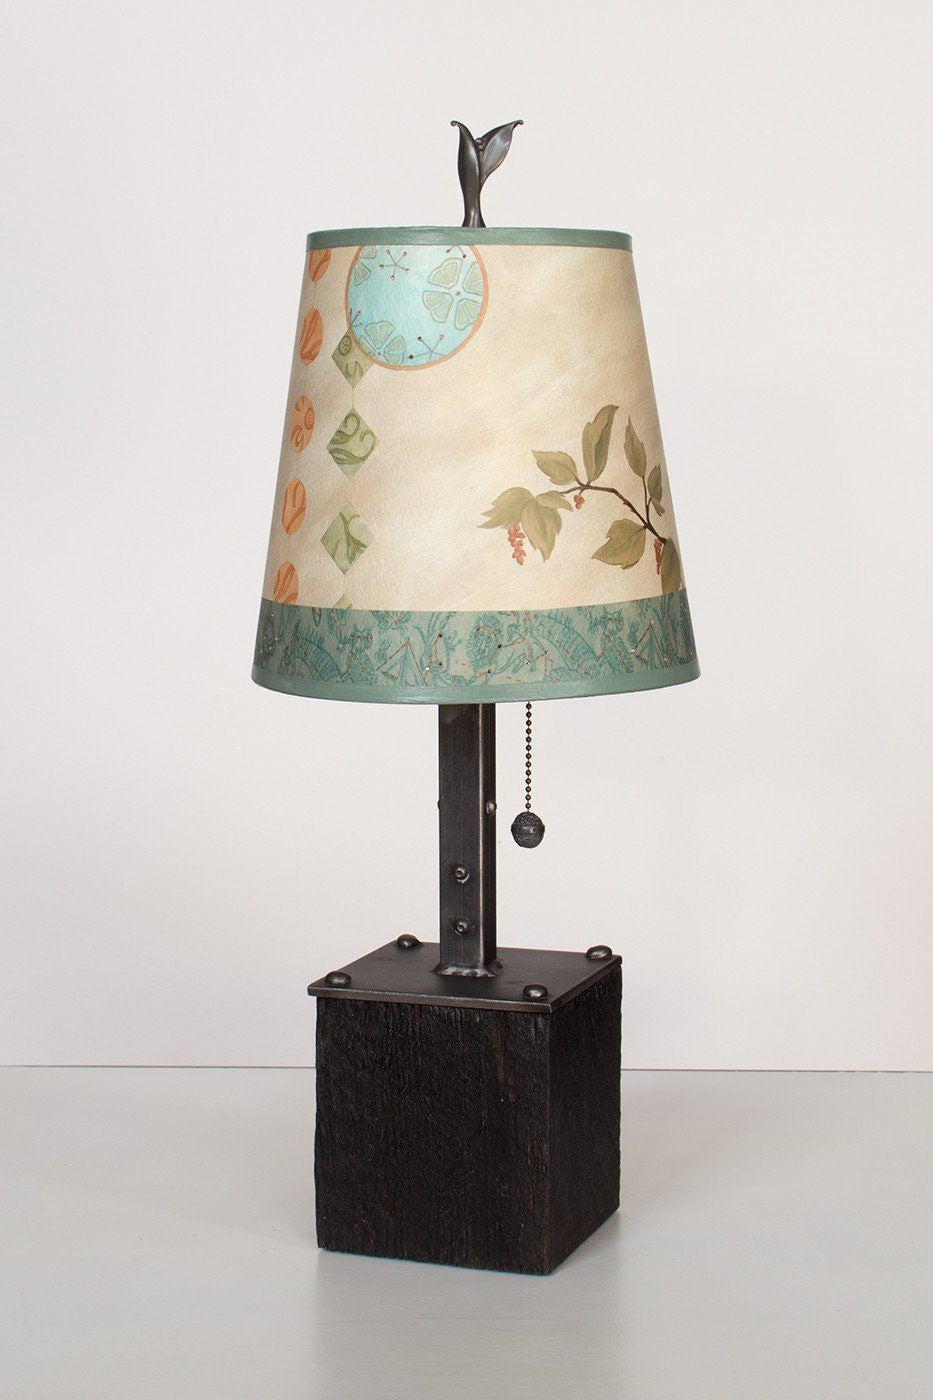 Steel Table Lamp on Reclaimed Wood with Small Drum Shade in Celestial Leaf Lit